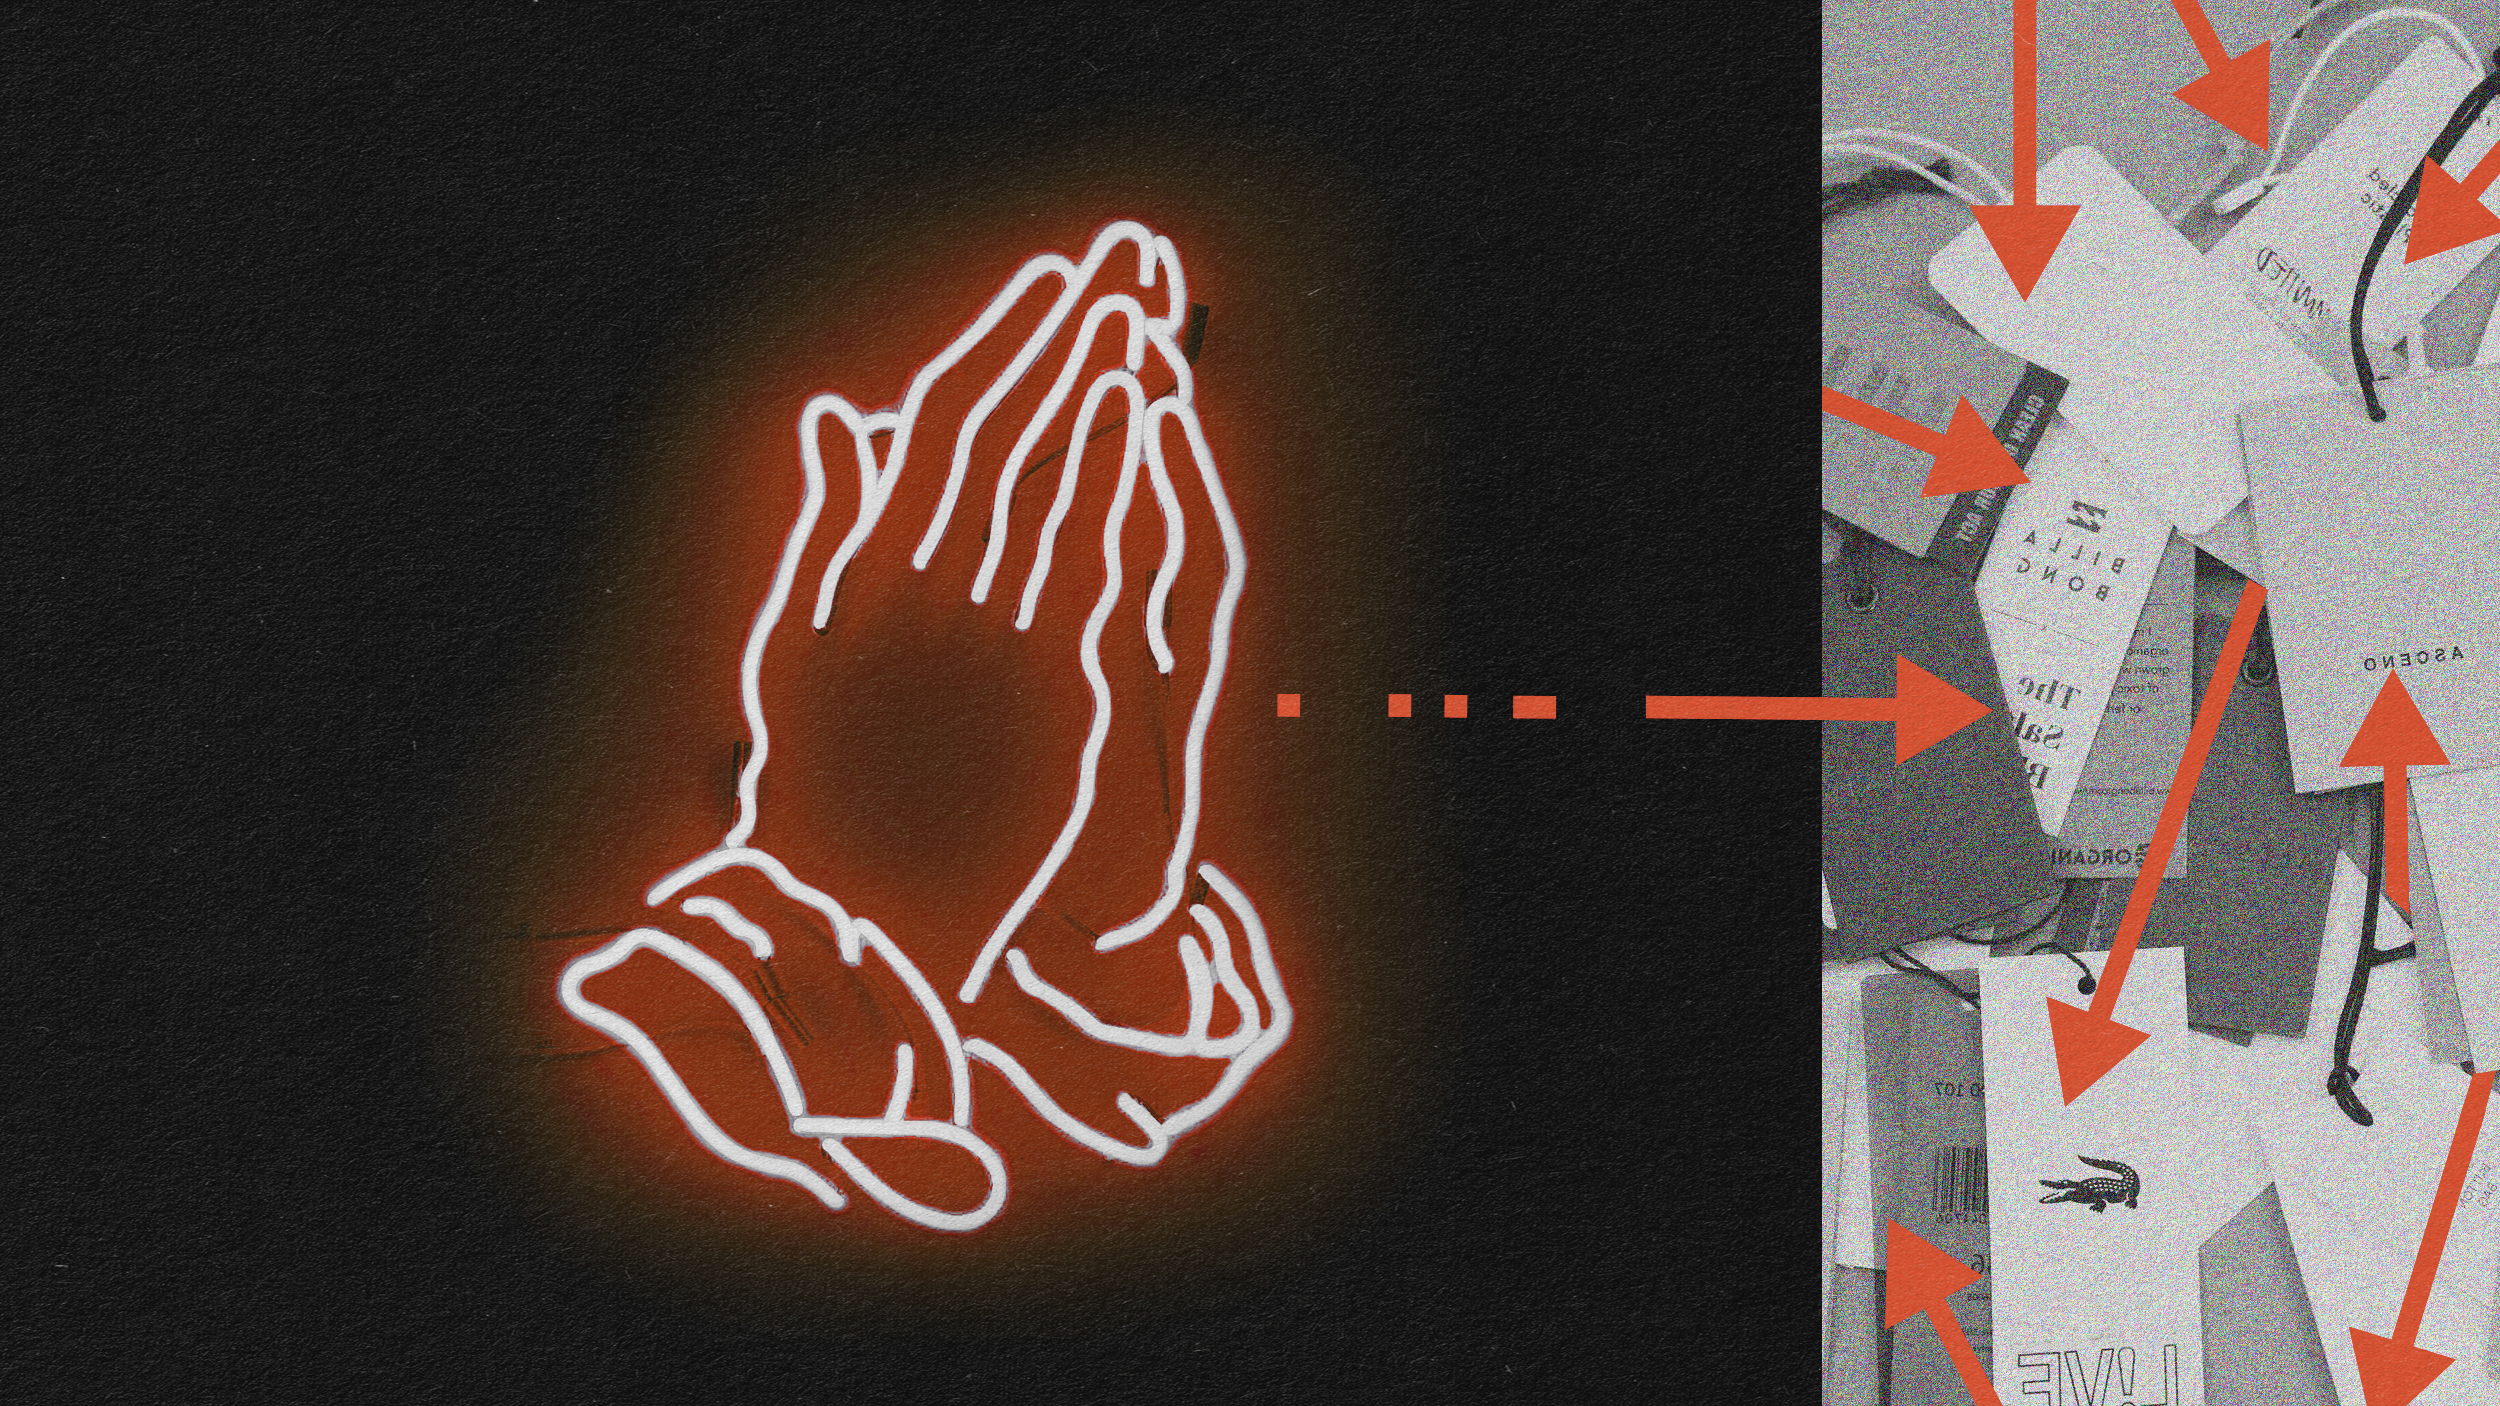 Neon outline of hands in prayer with an arrow pointing from them to a collage of various brand tags on the right side of the image.